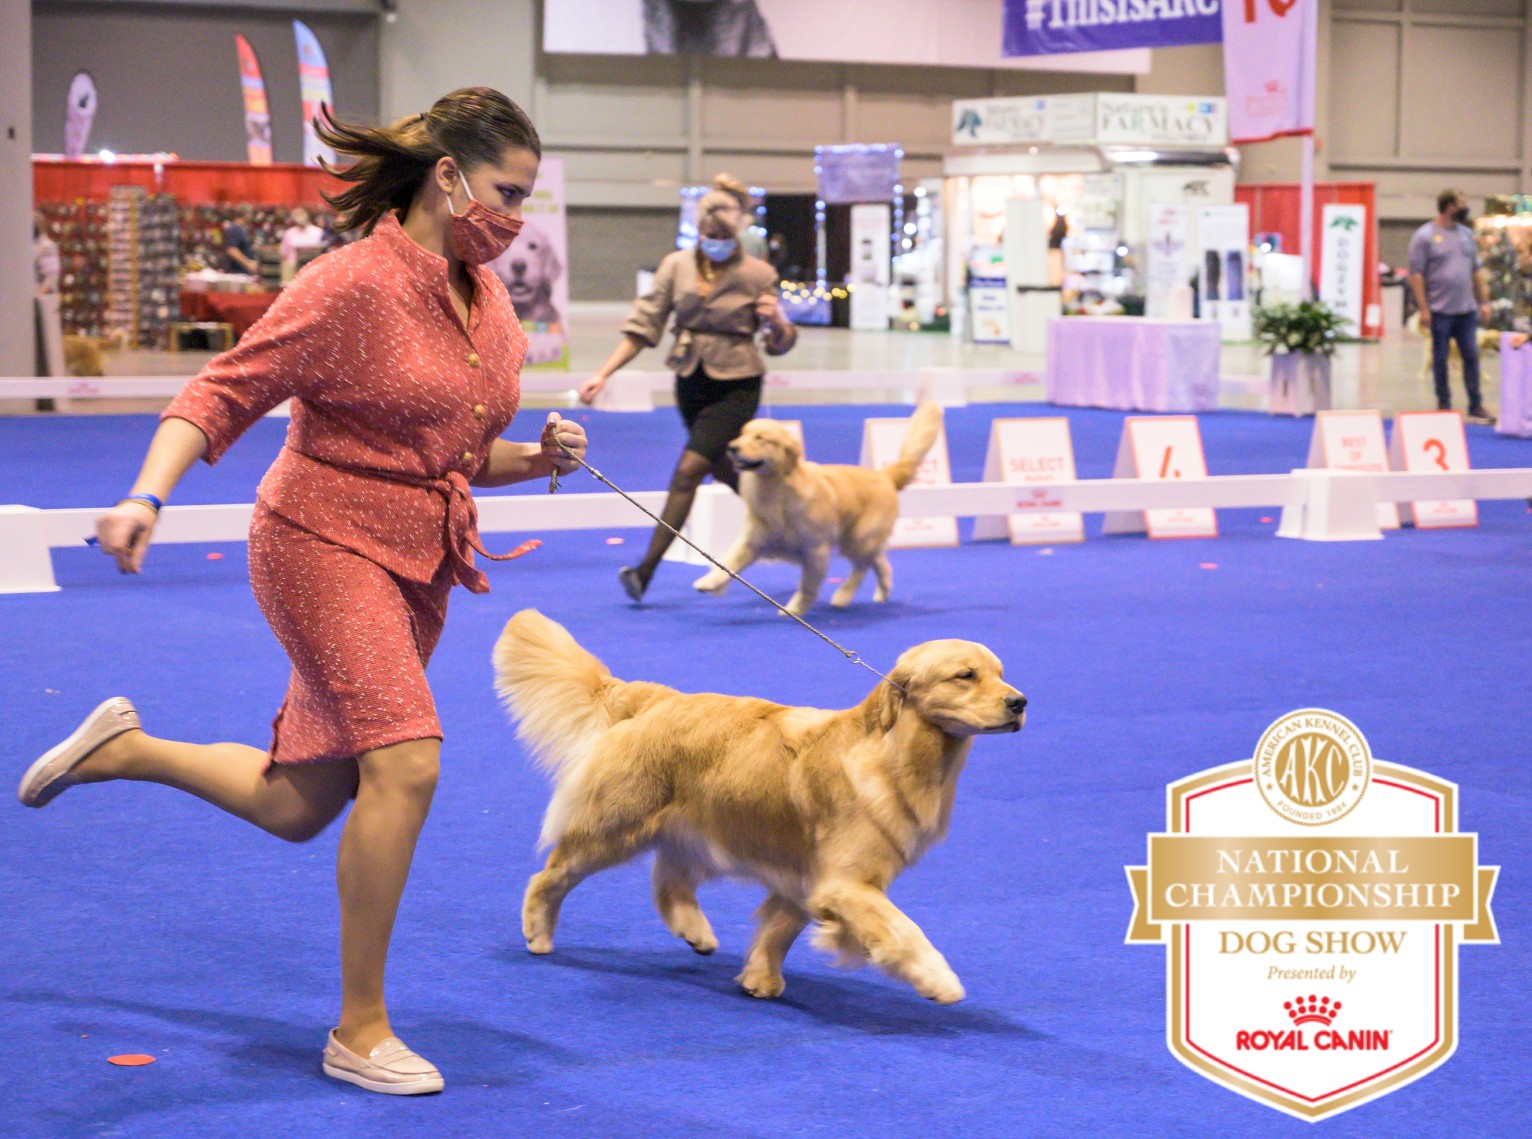 AKC National Championship at the Orange County Convention Center